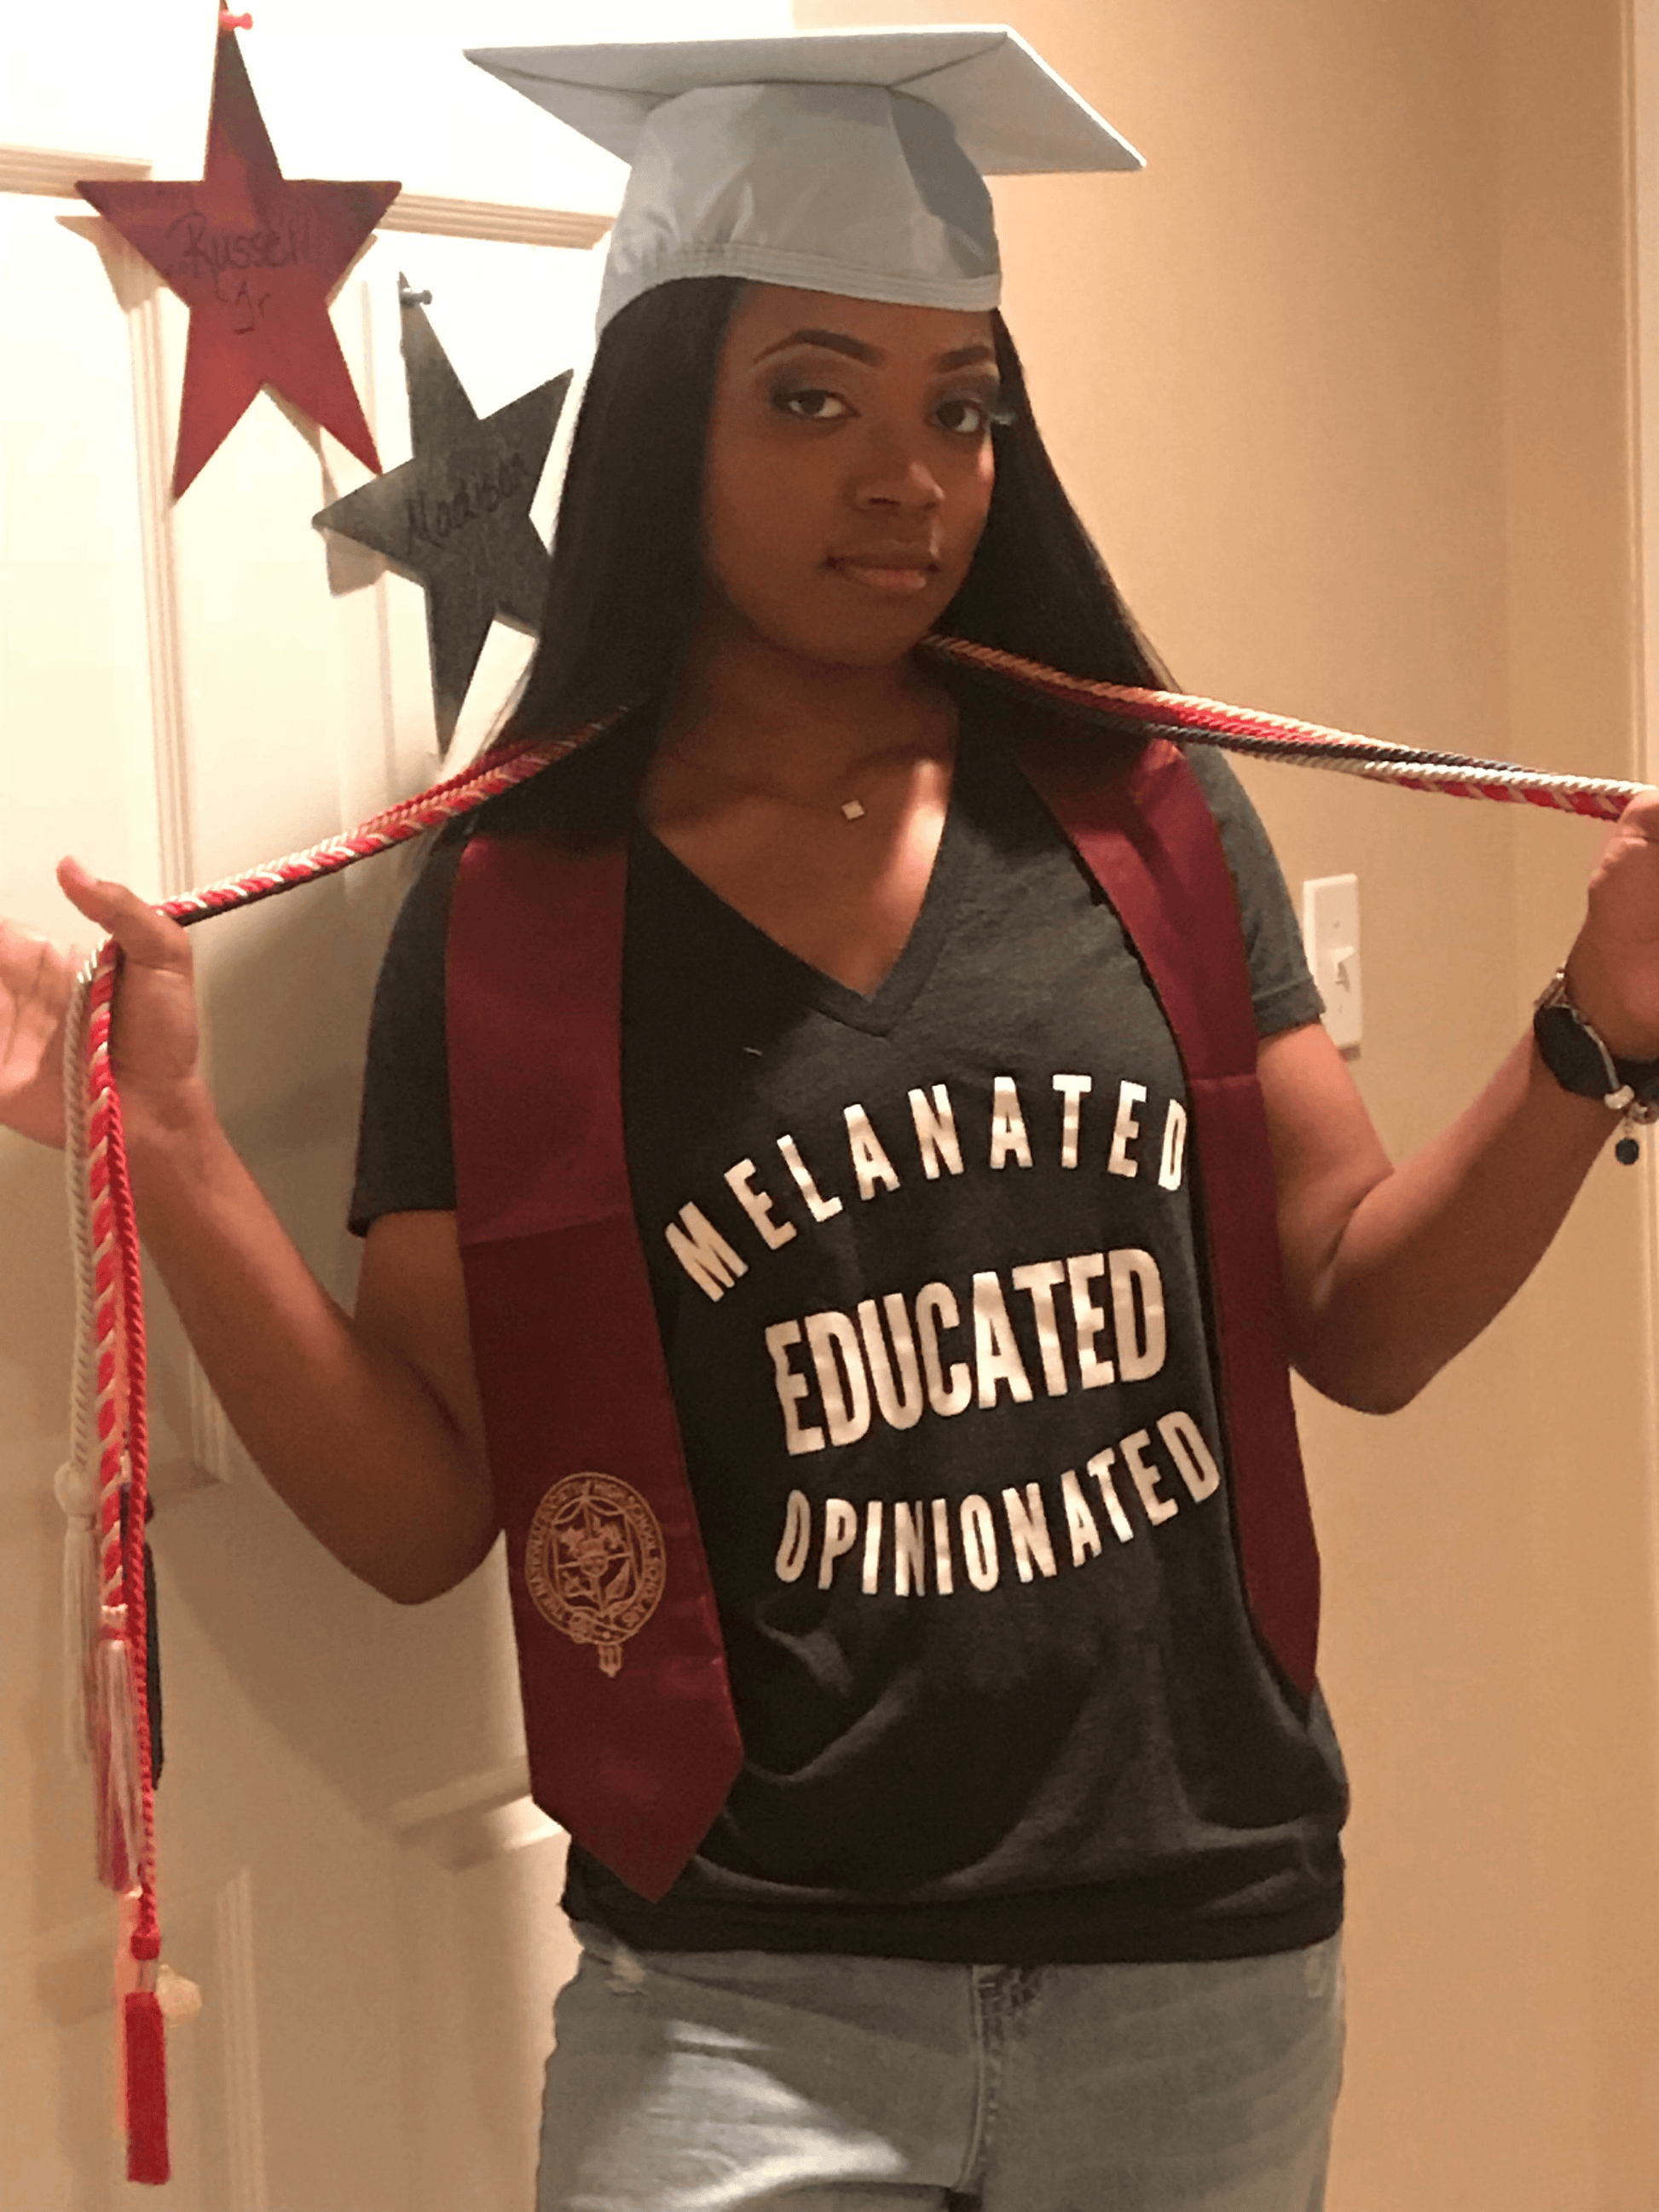 Melanated Educated Opinionated V Neck T Shirt T shirt on high school graduate 